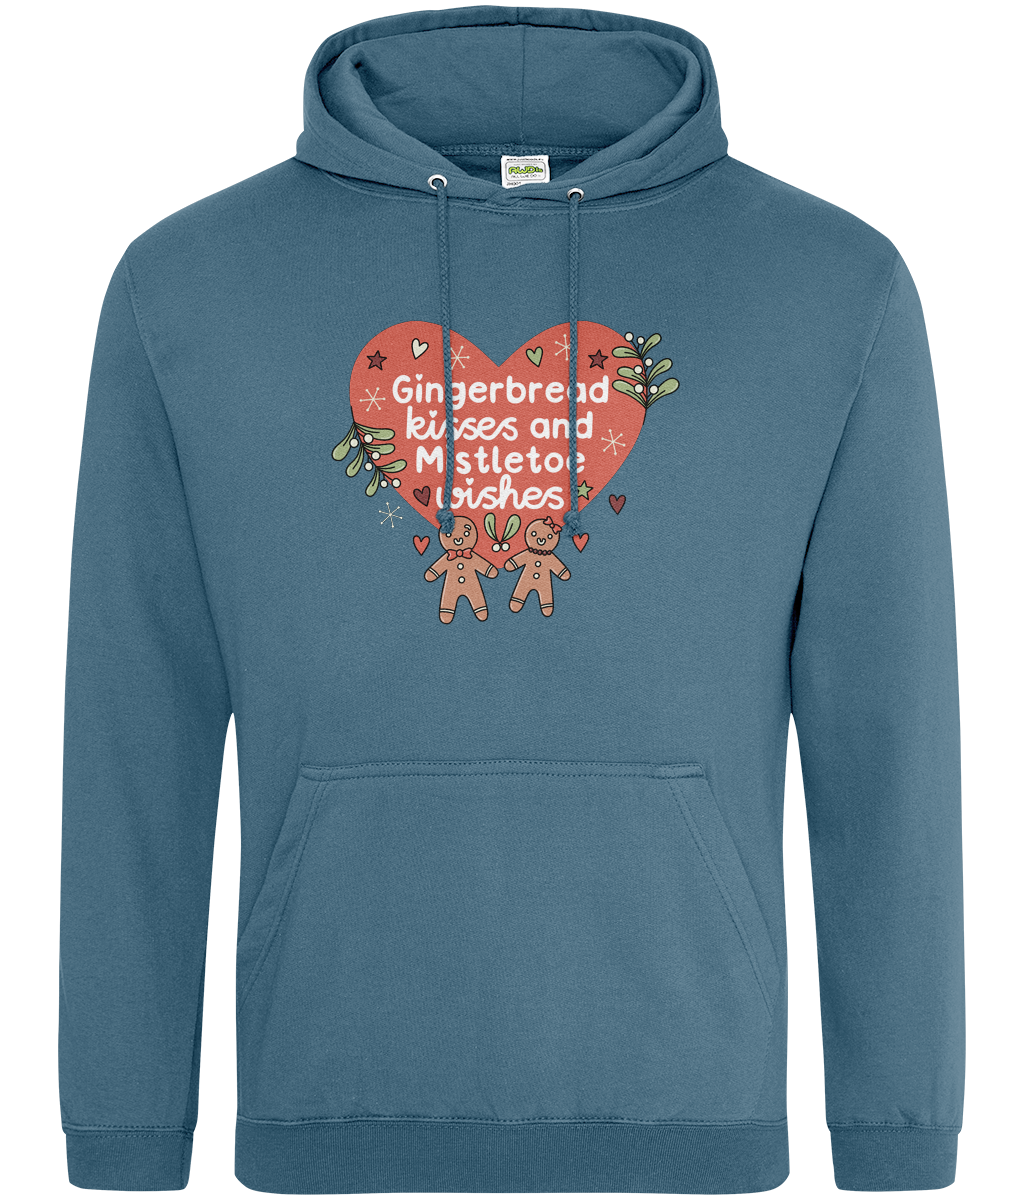 Gingerbread Kisses and Mistletoe Wishes - Adult Hoodie - Multi Colour Available